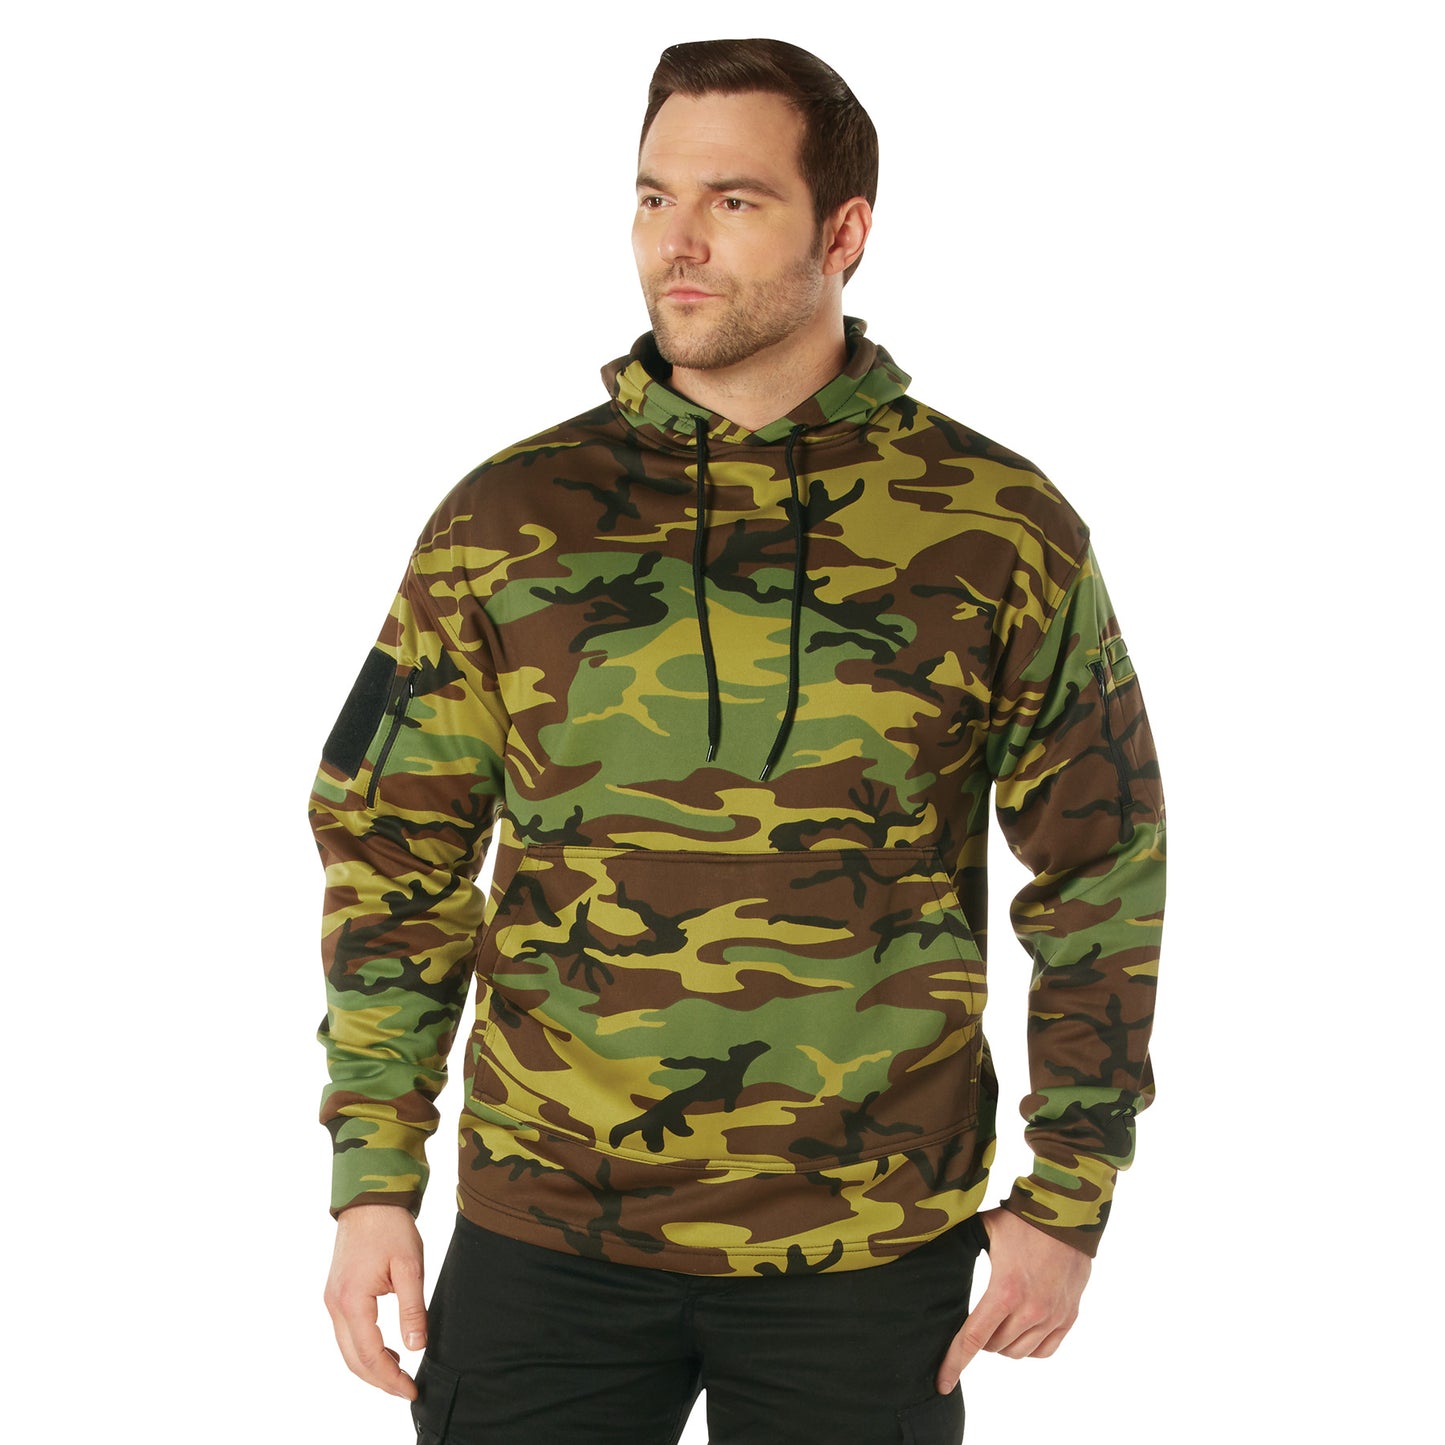 Rothco Concealed Carry Hoodie - Woodland Camo